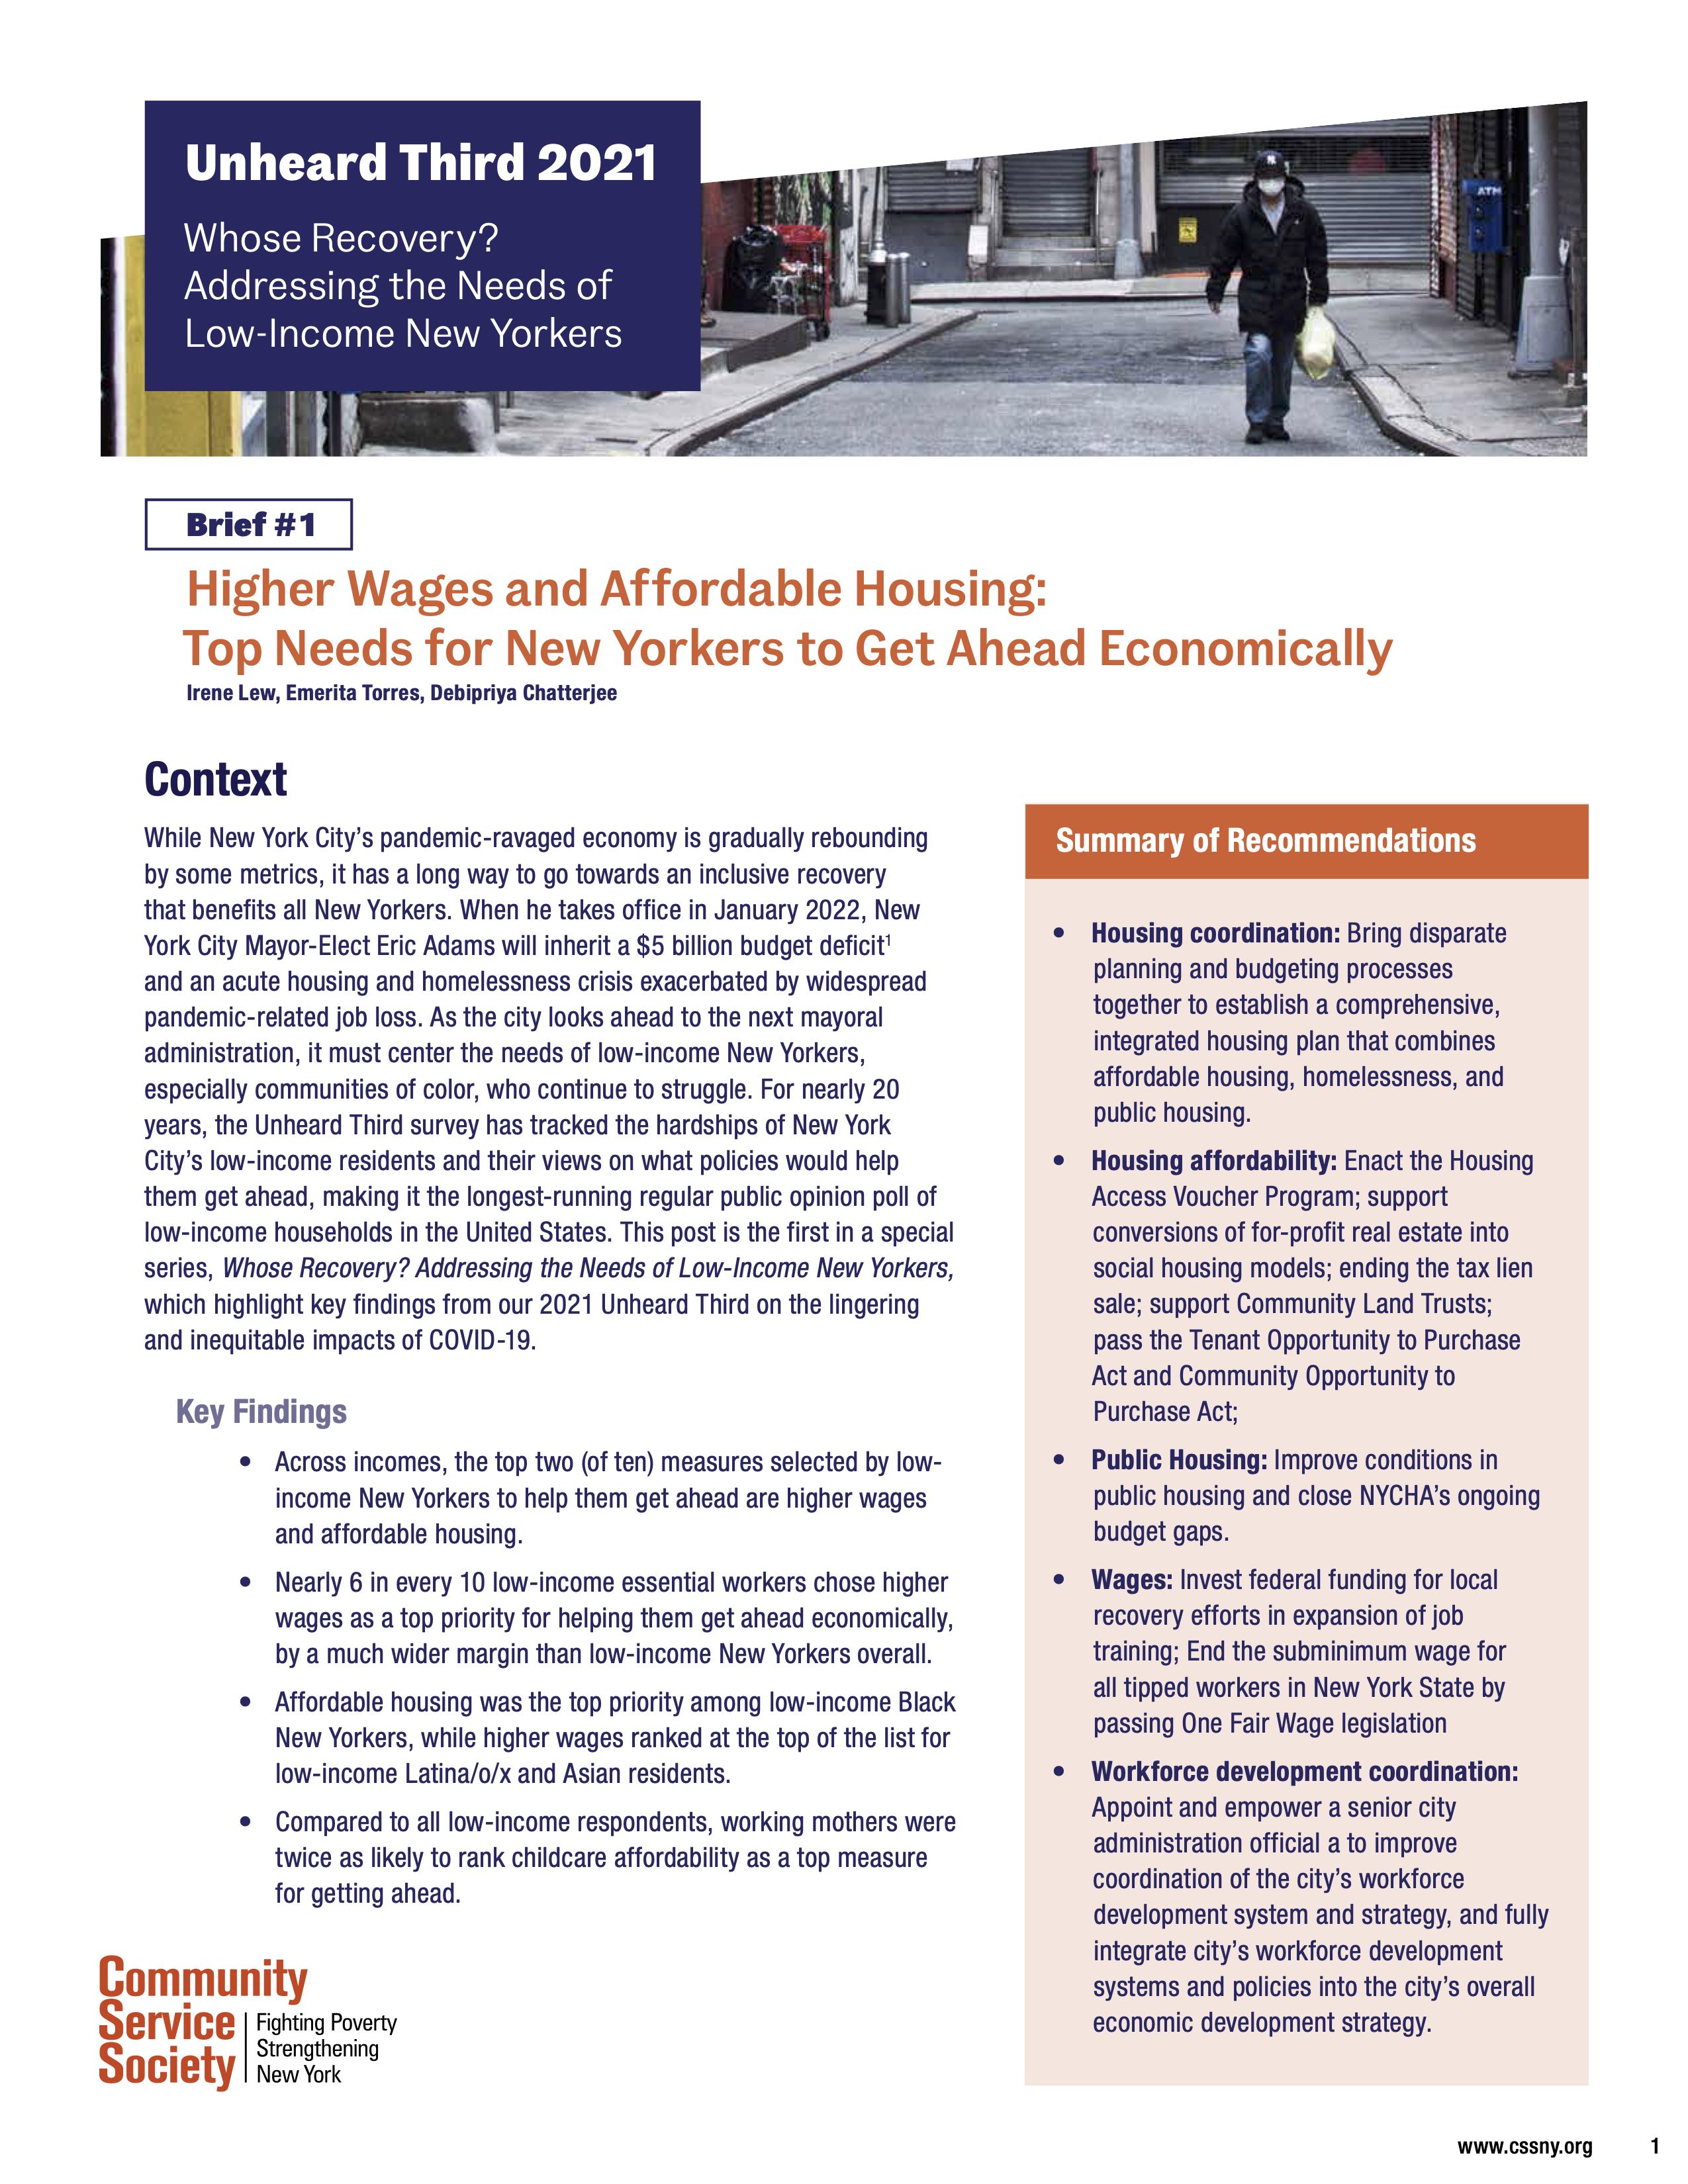 Higher Wages and Affordable Housing: Top Needs for New Yorkers to Get Ahead Economically